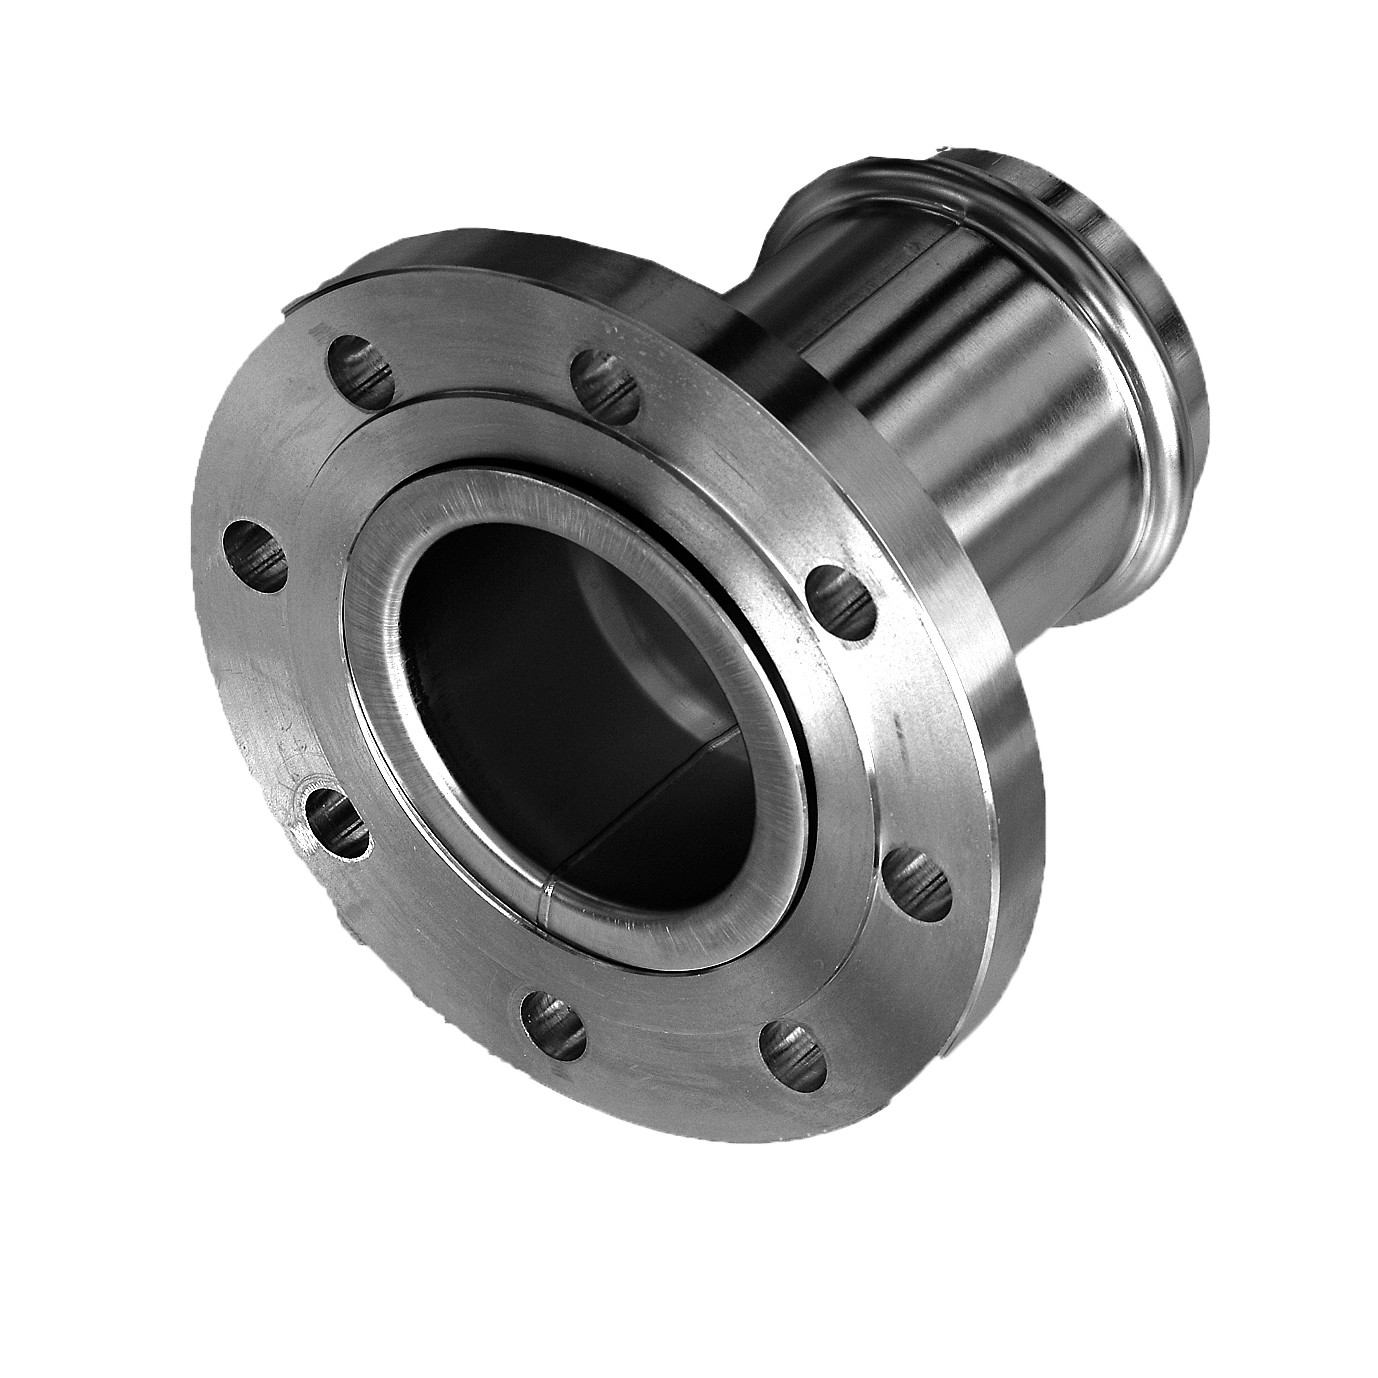 Ss 3 Inch Customizable Hydraulic Flange Stainless Steel Pipe Fittings Connector